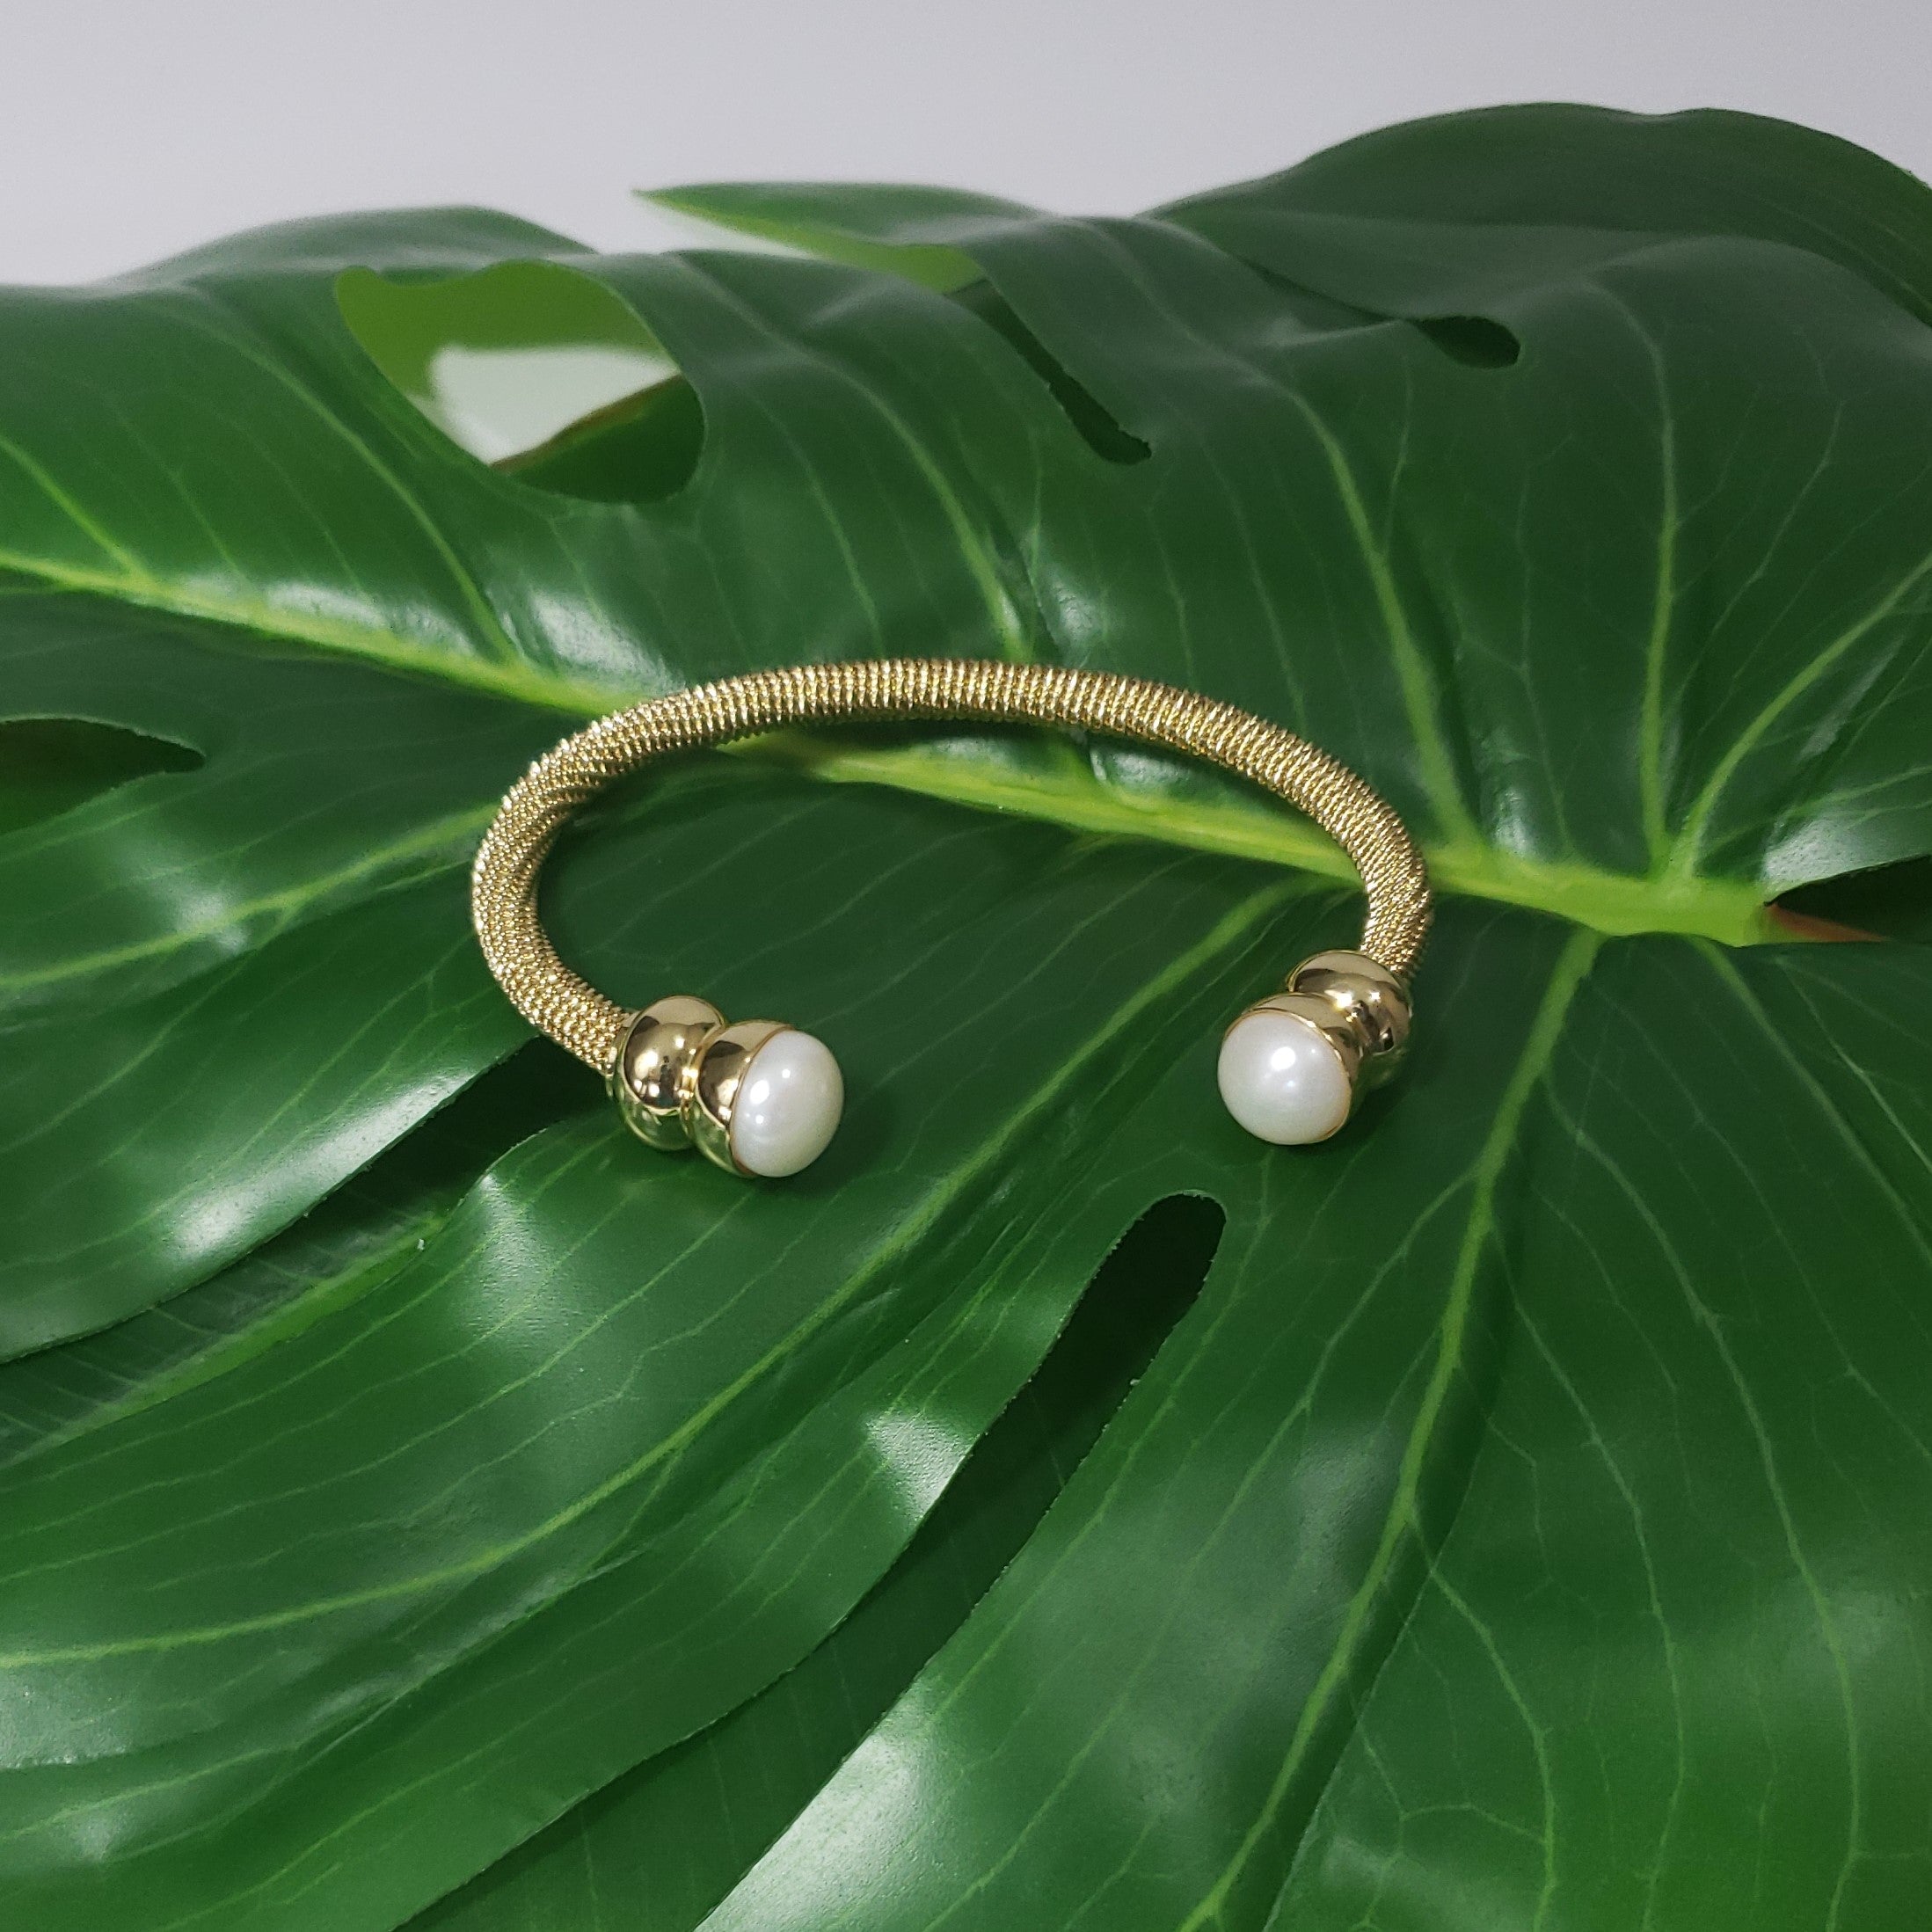 Freshwater Pearl YG Stainless Steel Twisted Cuff 9.5-10mm (7.50 in) - Houzz of DVA Boutique